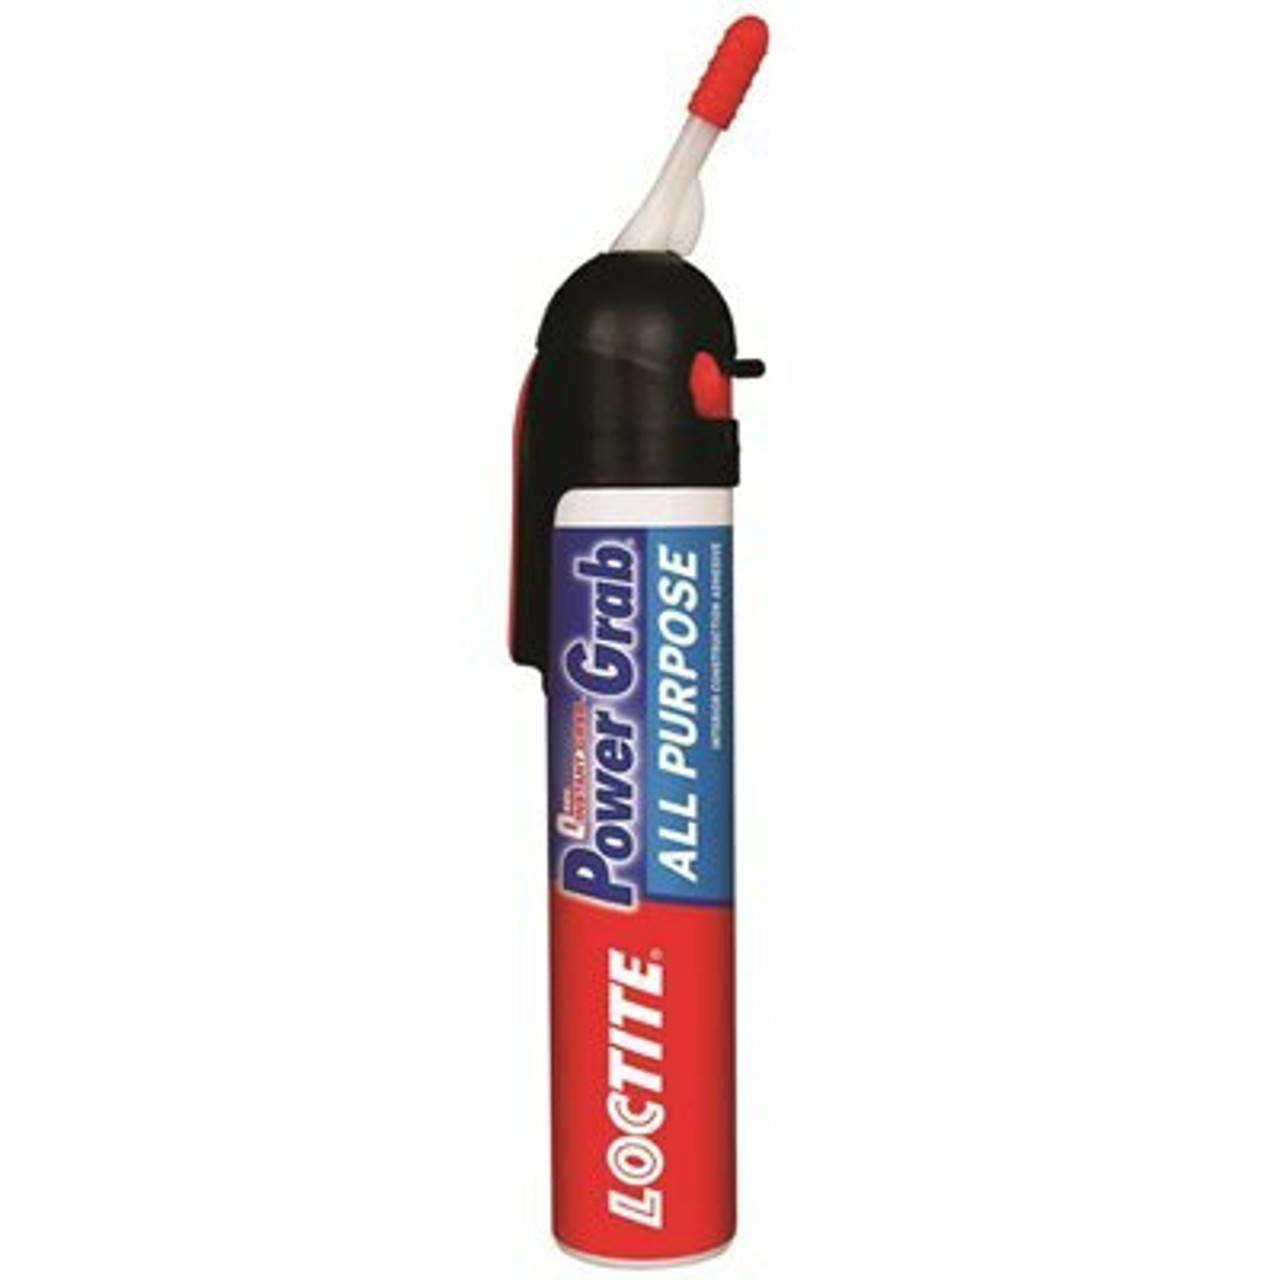 Loctite Power Grab Express 7.5 Oz. Pressure Pack Construction Adhesive